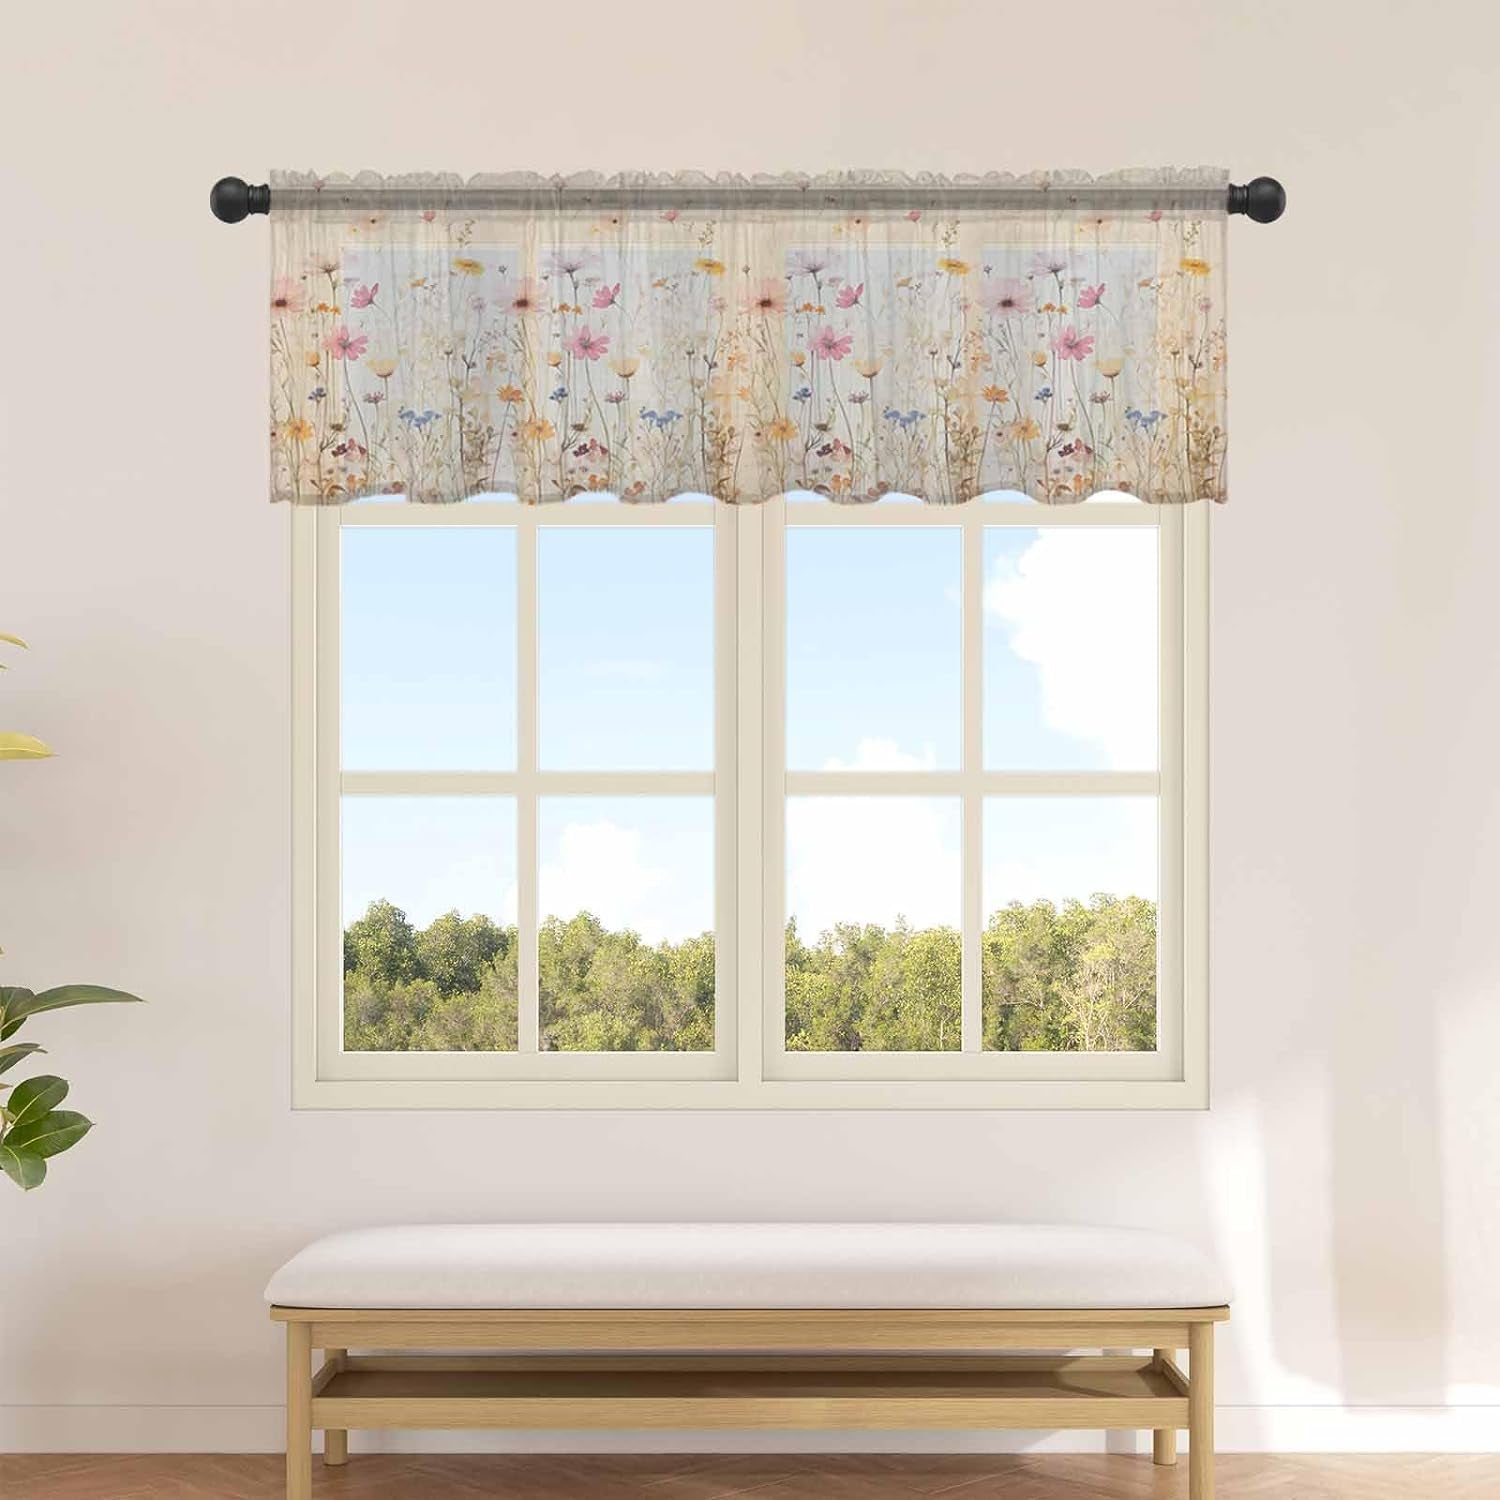 Botanical Wildflower Valance Curtains for Kitchen/Living Room/Bathroom/Bedroom Window,Rod Pocket Small Topper Half Short Window Curtains Voile Sheer Scarf, 54"X18" Retro Colored Spring Floral Herb